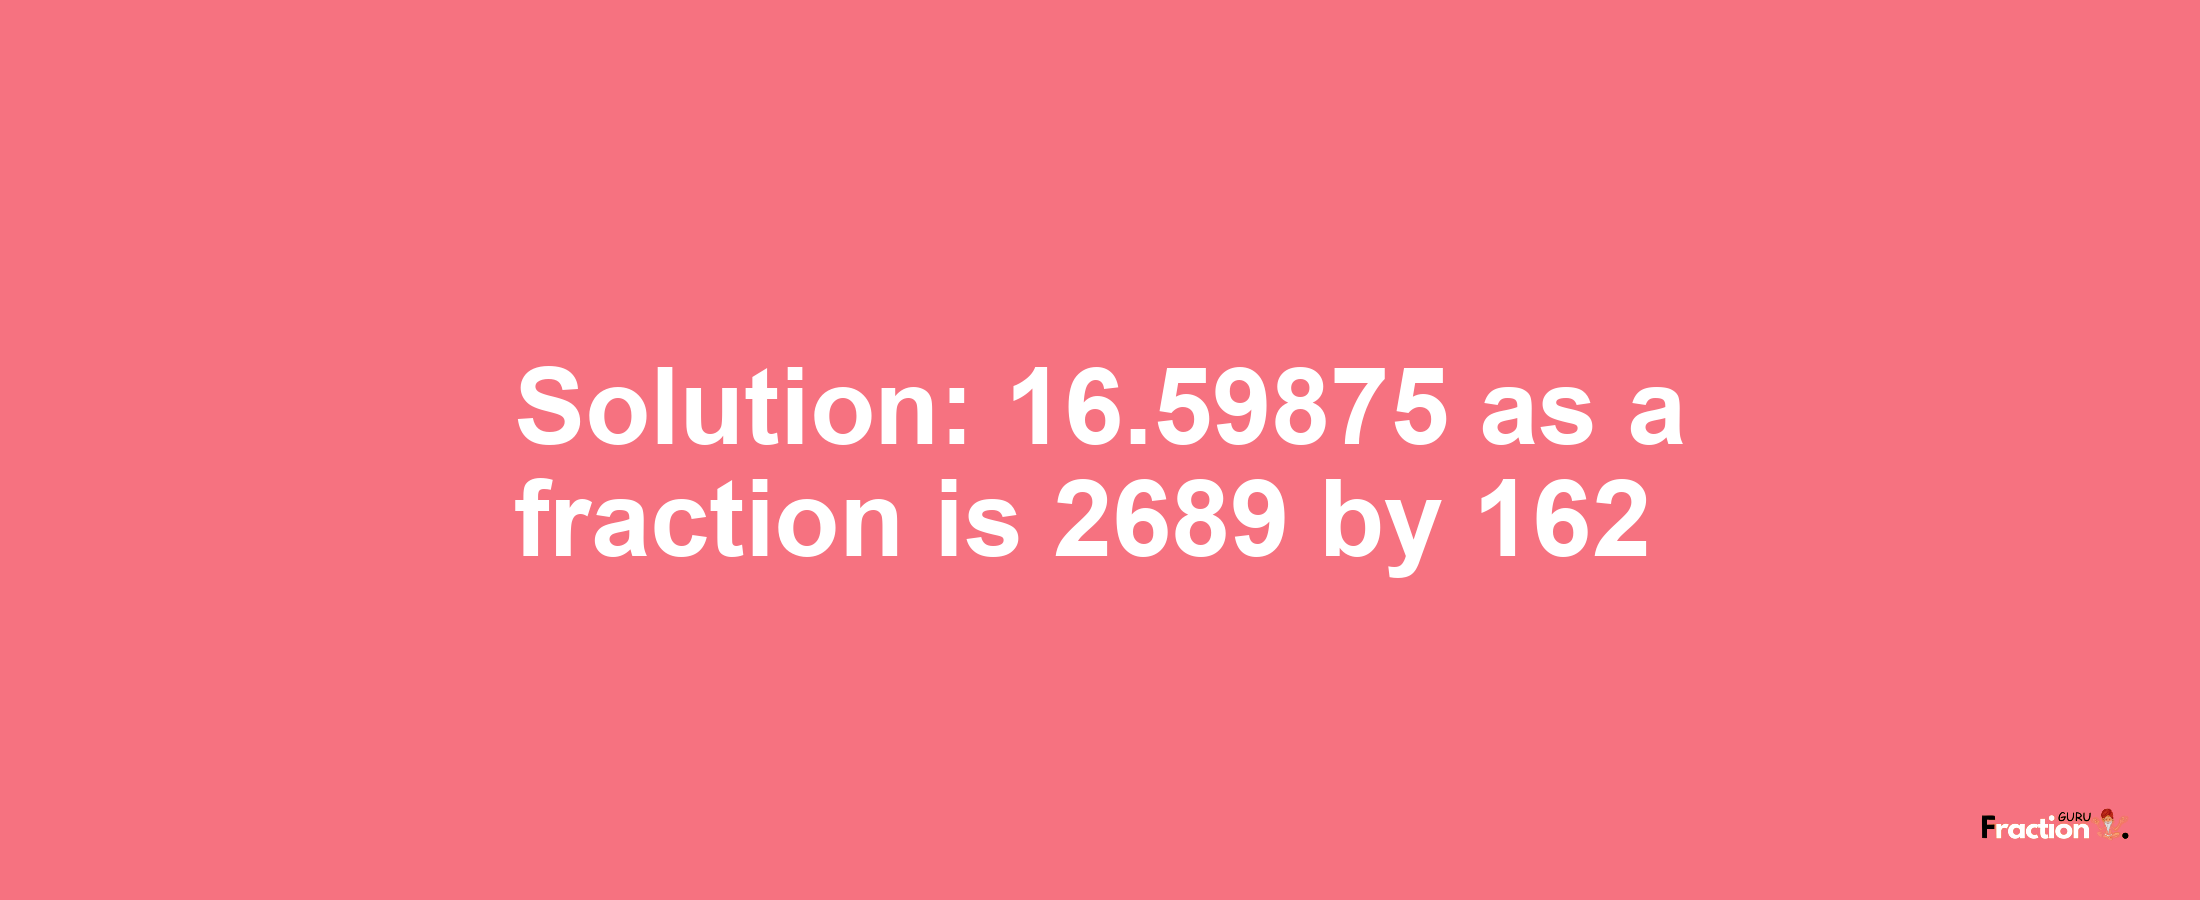 Solution:16.59875 as a fraction is 2689/162